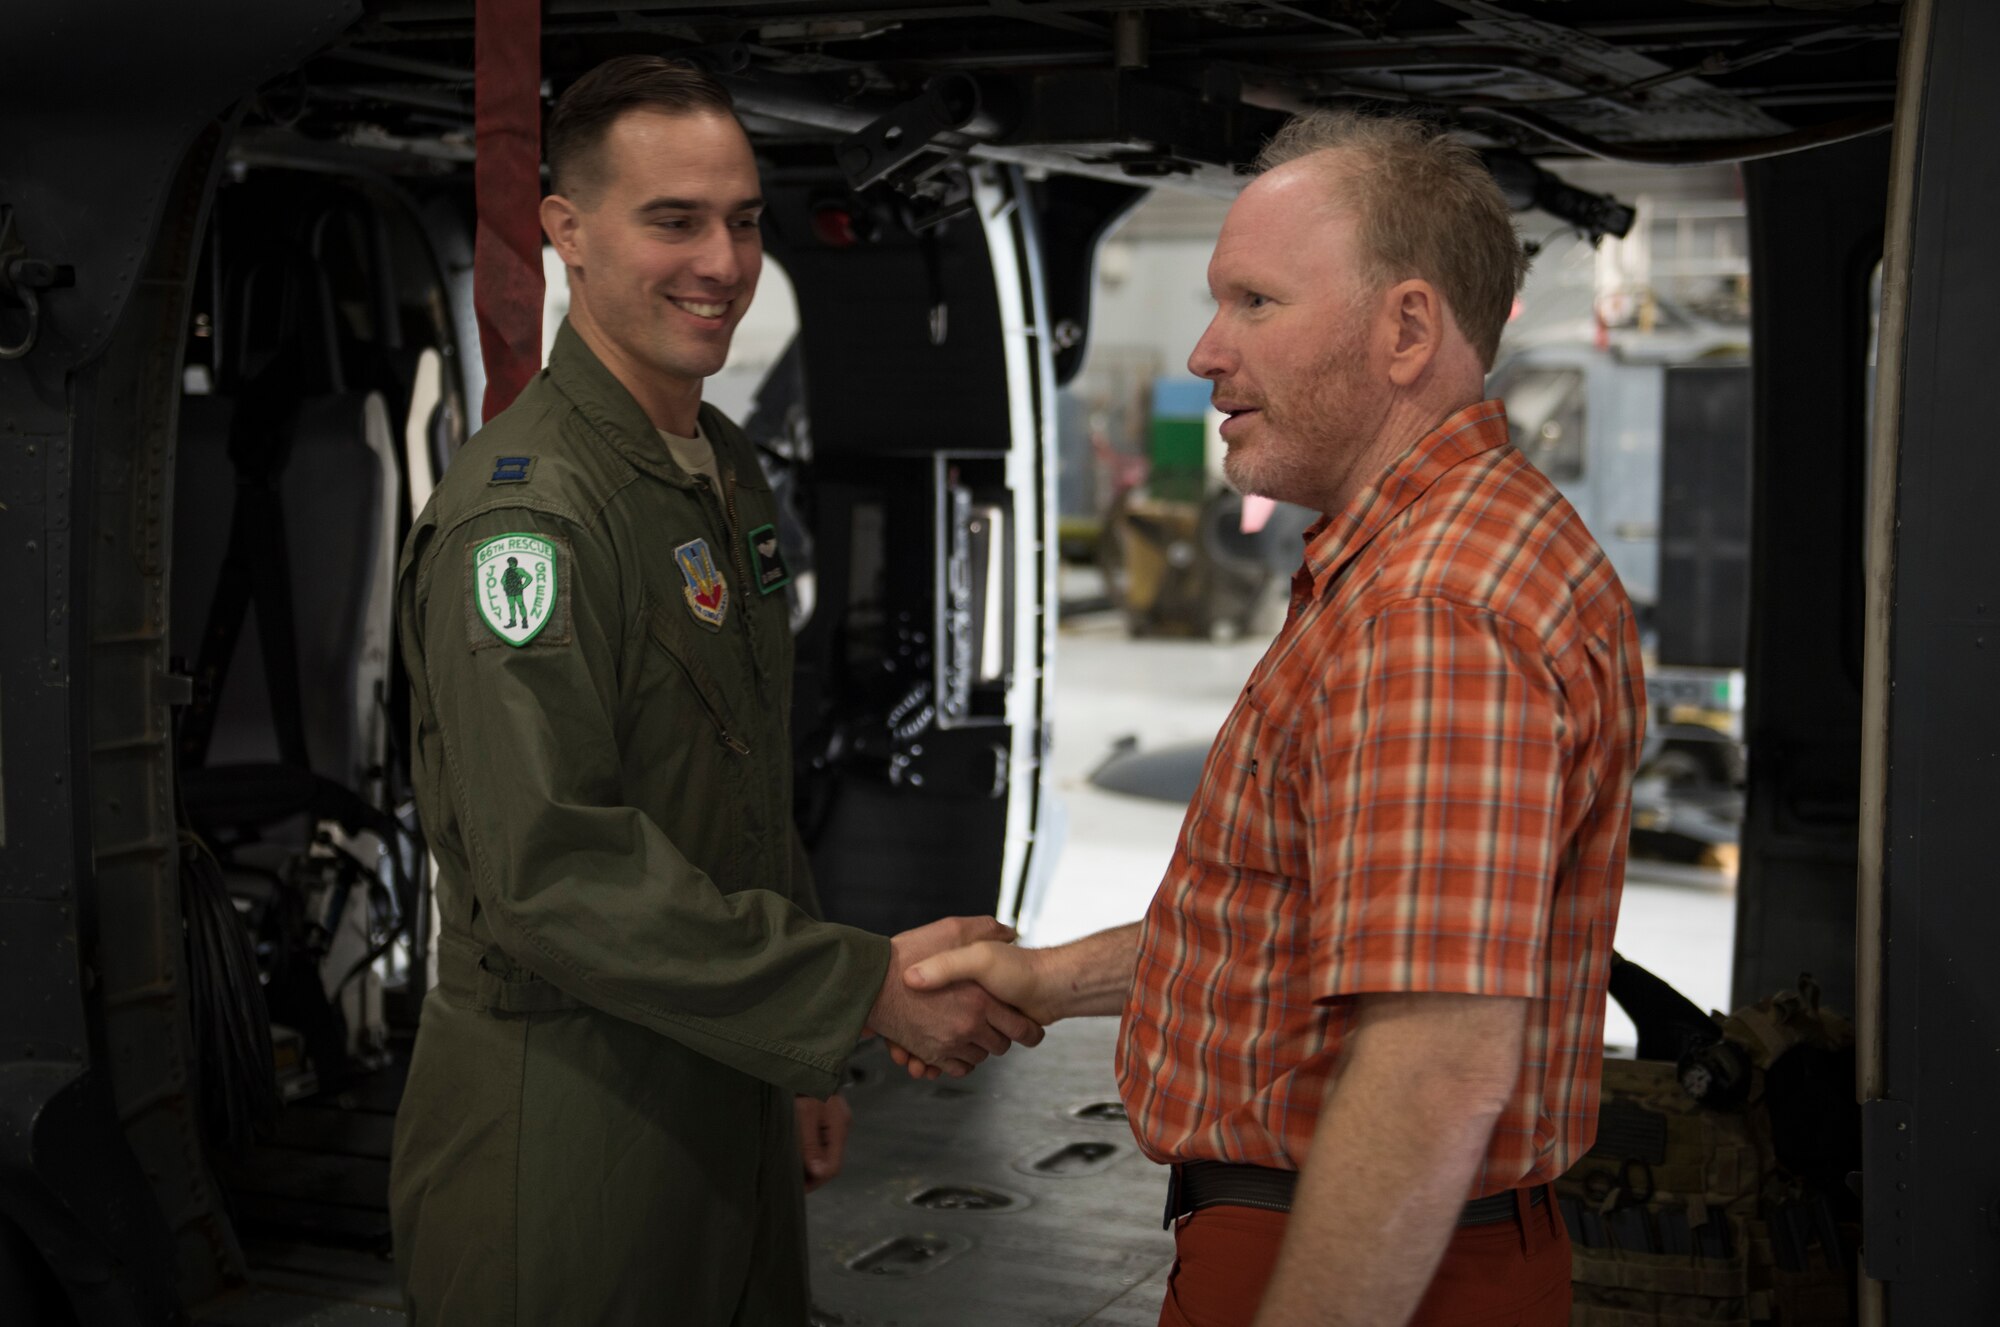 Capt. Ben Gransee, 66th Rescue Squadron HH-60G Pave Hawk helicopter pilot, meets Dr. Daniel Cottam, a bariatric surgeon from Salt Lake City, Utah, at Nellis Air Force Base, Nevada, Nov. 16, 2018. Gransee piloted the helicopter that rescued Cottam after he was severely injured after falling off a cliff when his climbing equipment malfunctioned. (U.S. Air Force photo by Airman 1st Class Andrew D. Sarver)